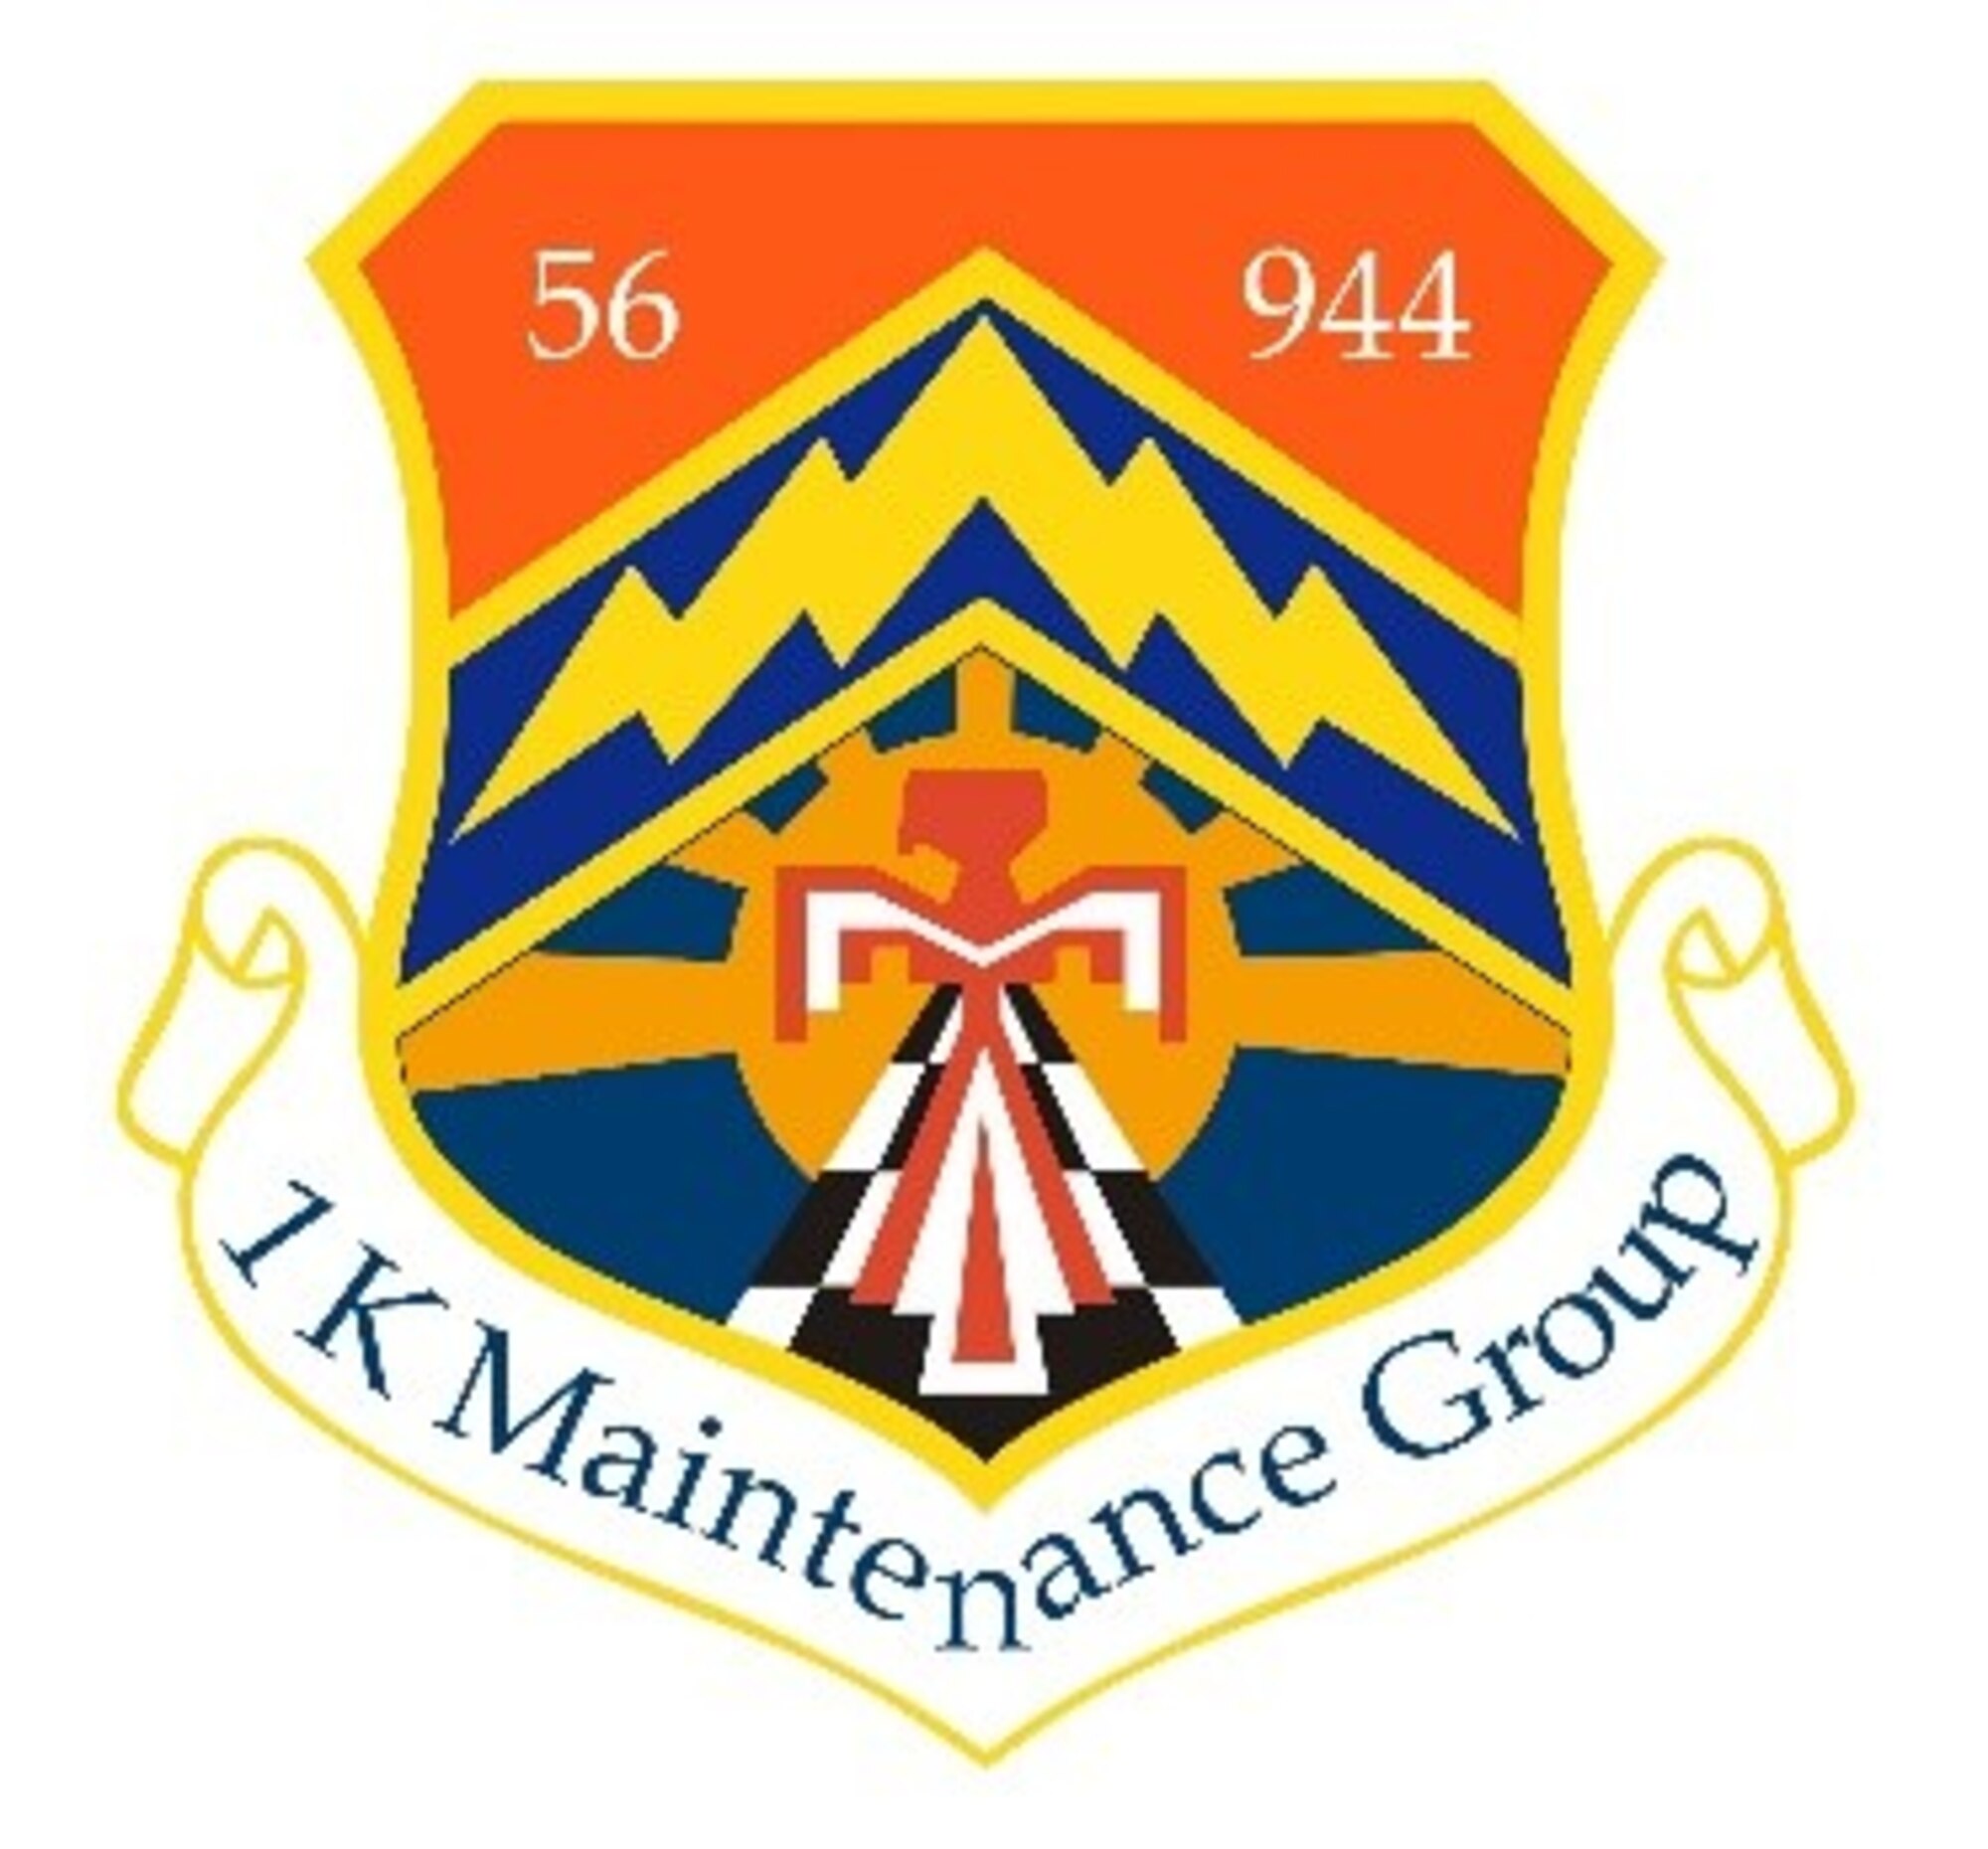 The 56th and 944th Fighter Wings’ maintenance groups, referred to as the 1K Maintenance Group at Luke Air Force Base, Arizona, will be recipients of the 2020 Secretary of Defense Field-level Maintenance Award in the large category. The information was officially confirmed in a Department of Defense news release posted on Nov. 19.